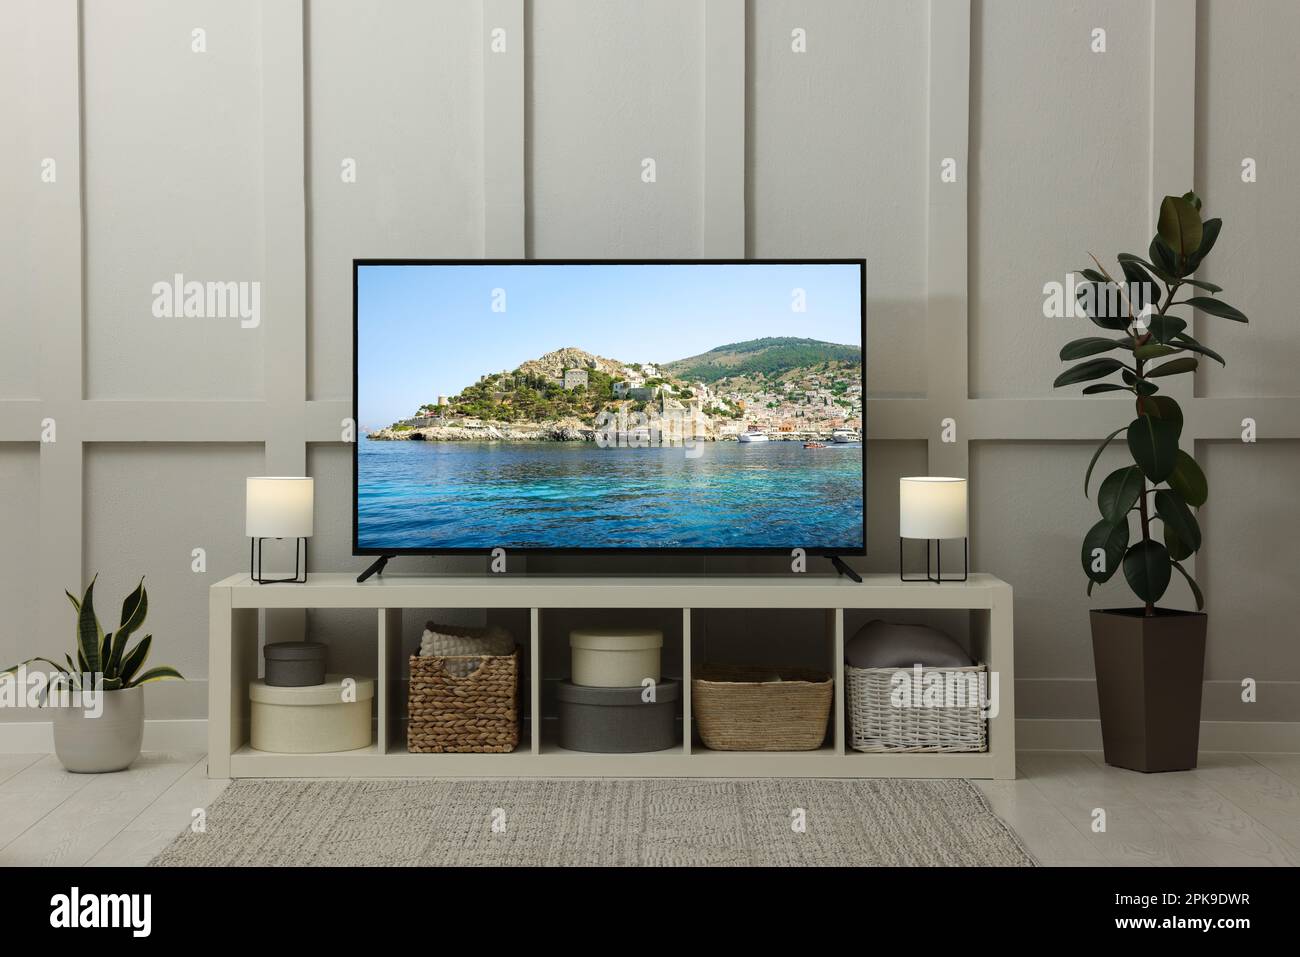 Modern TV set on wooden stand in room. Scene of nature themed movie on screen Stock Photo